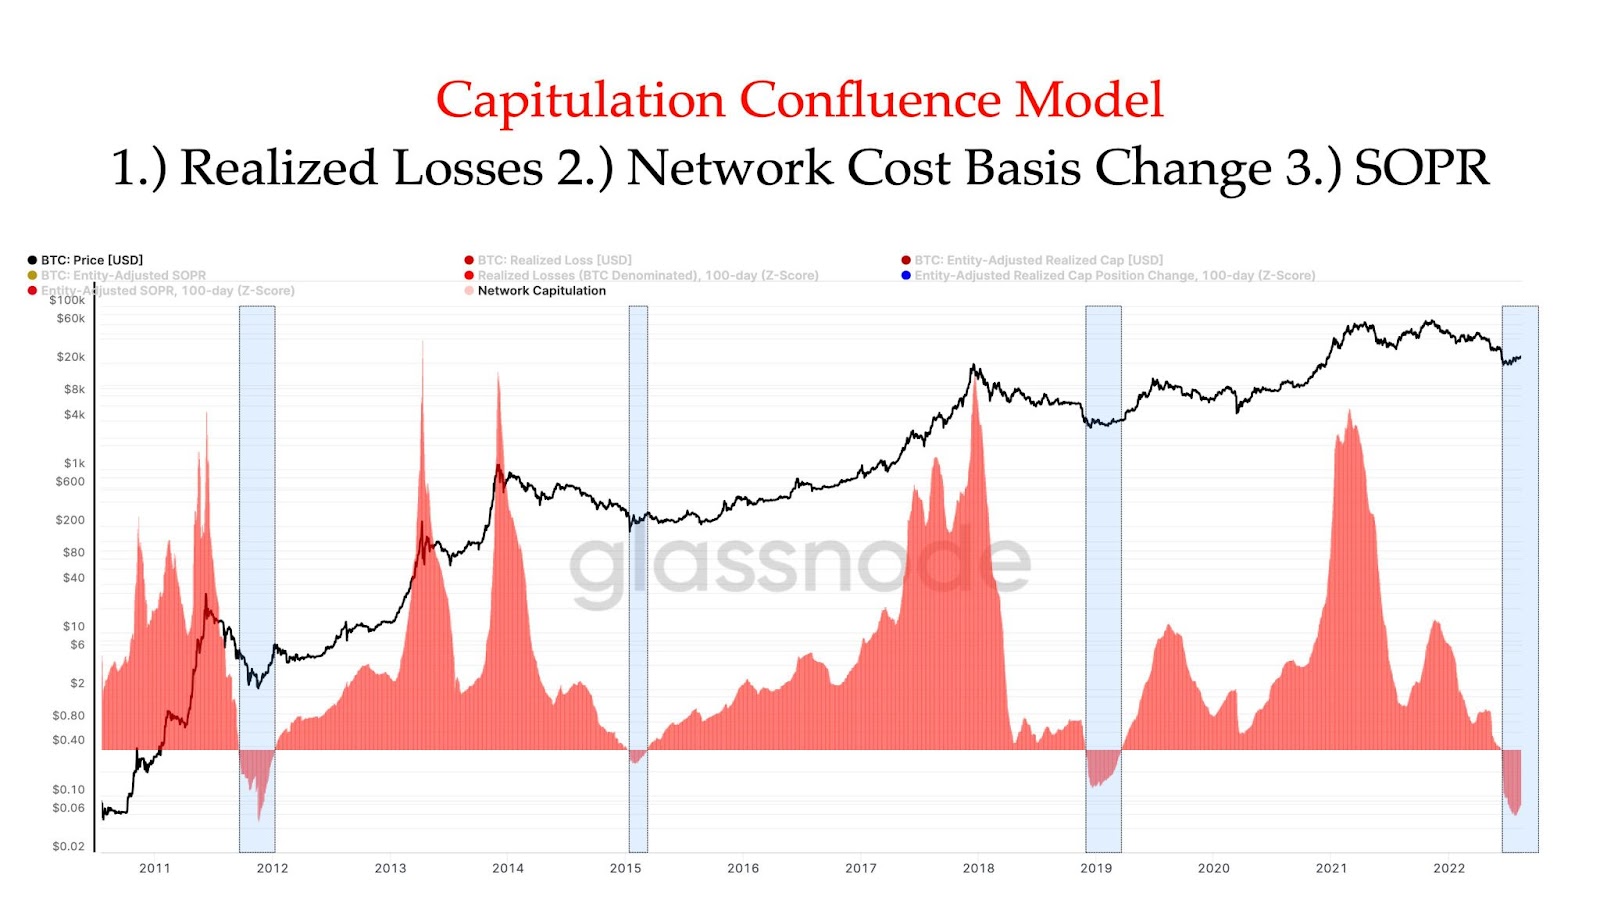 Capitulation Confluence Model: Bitcoin (BTC) Is in Phase of Triple Capitulation